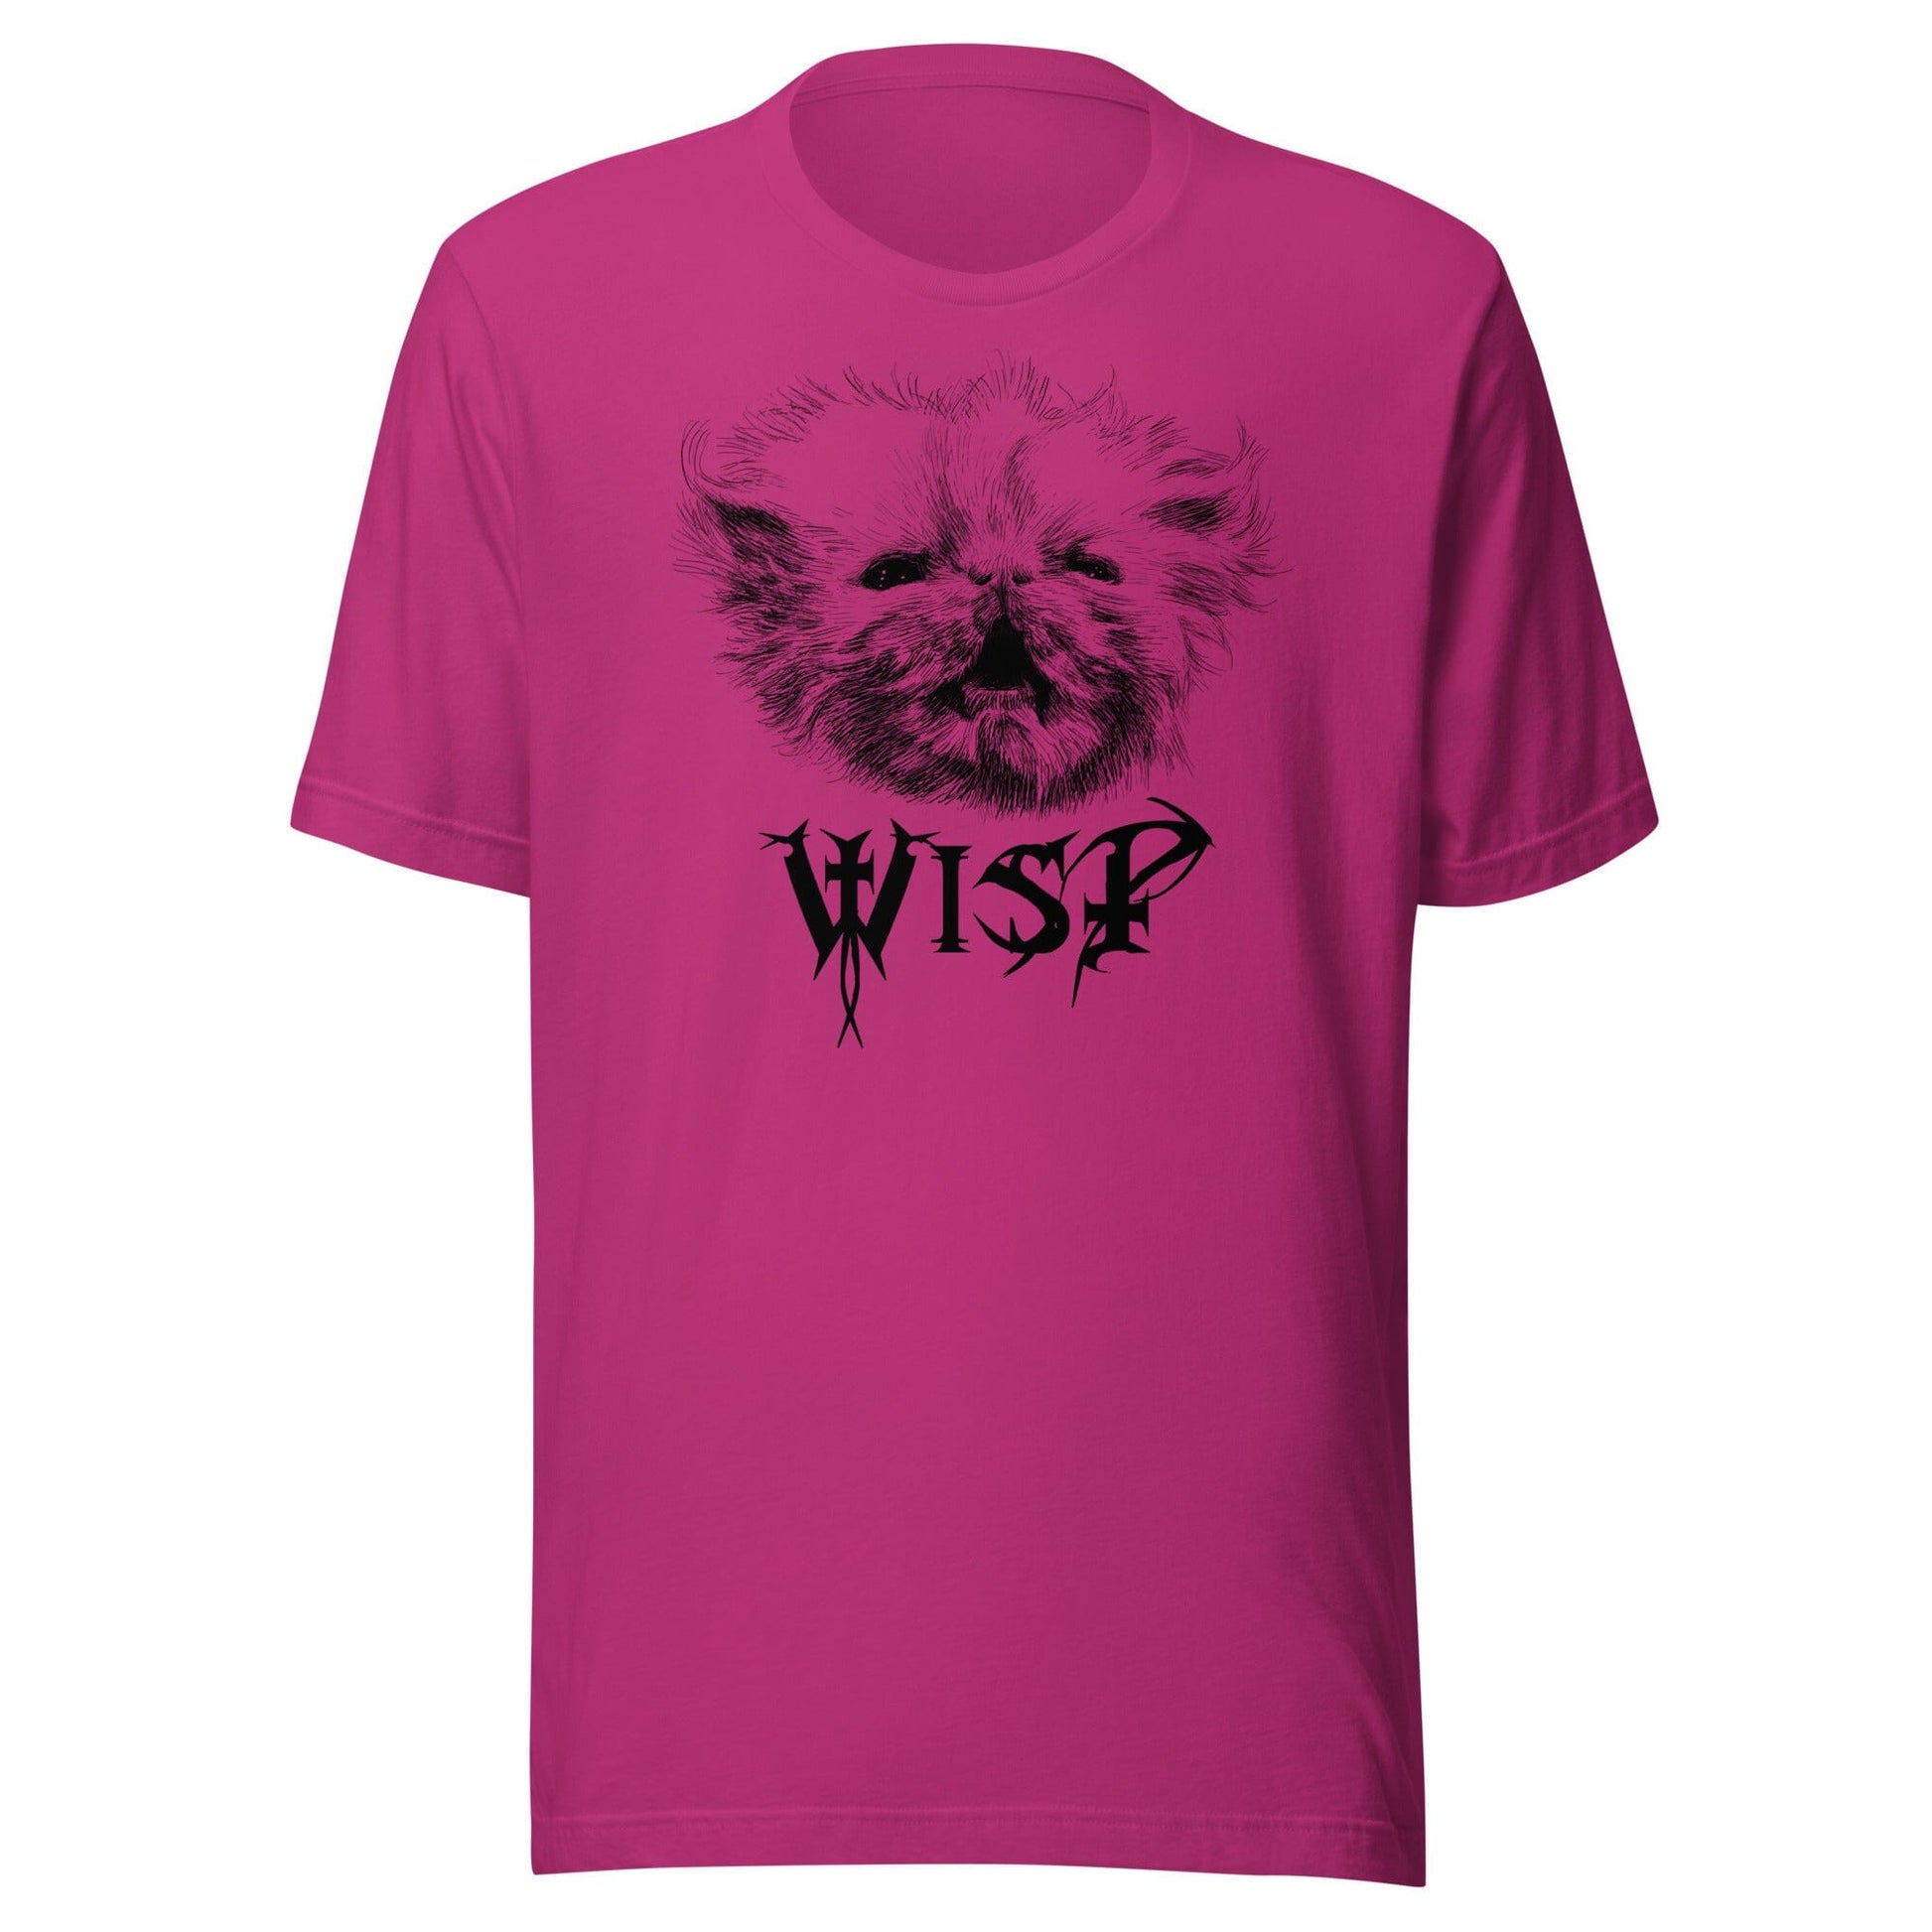 Metal Wisp T-Shirt [Unfoiled] (All net proceeds go to Rags to Riches Animal Rescue) JoyousJoyfulJoyness Berry S 